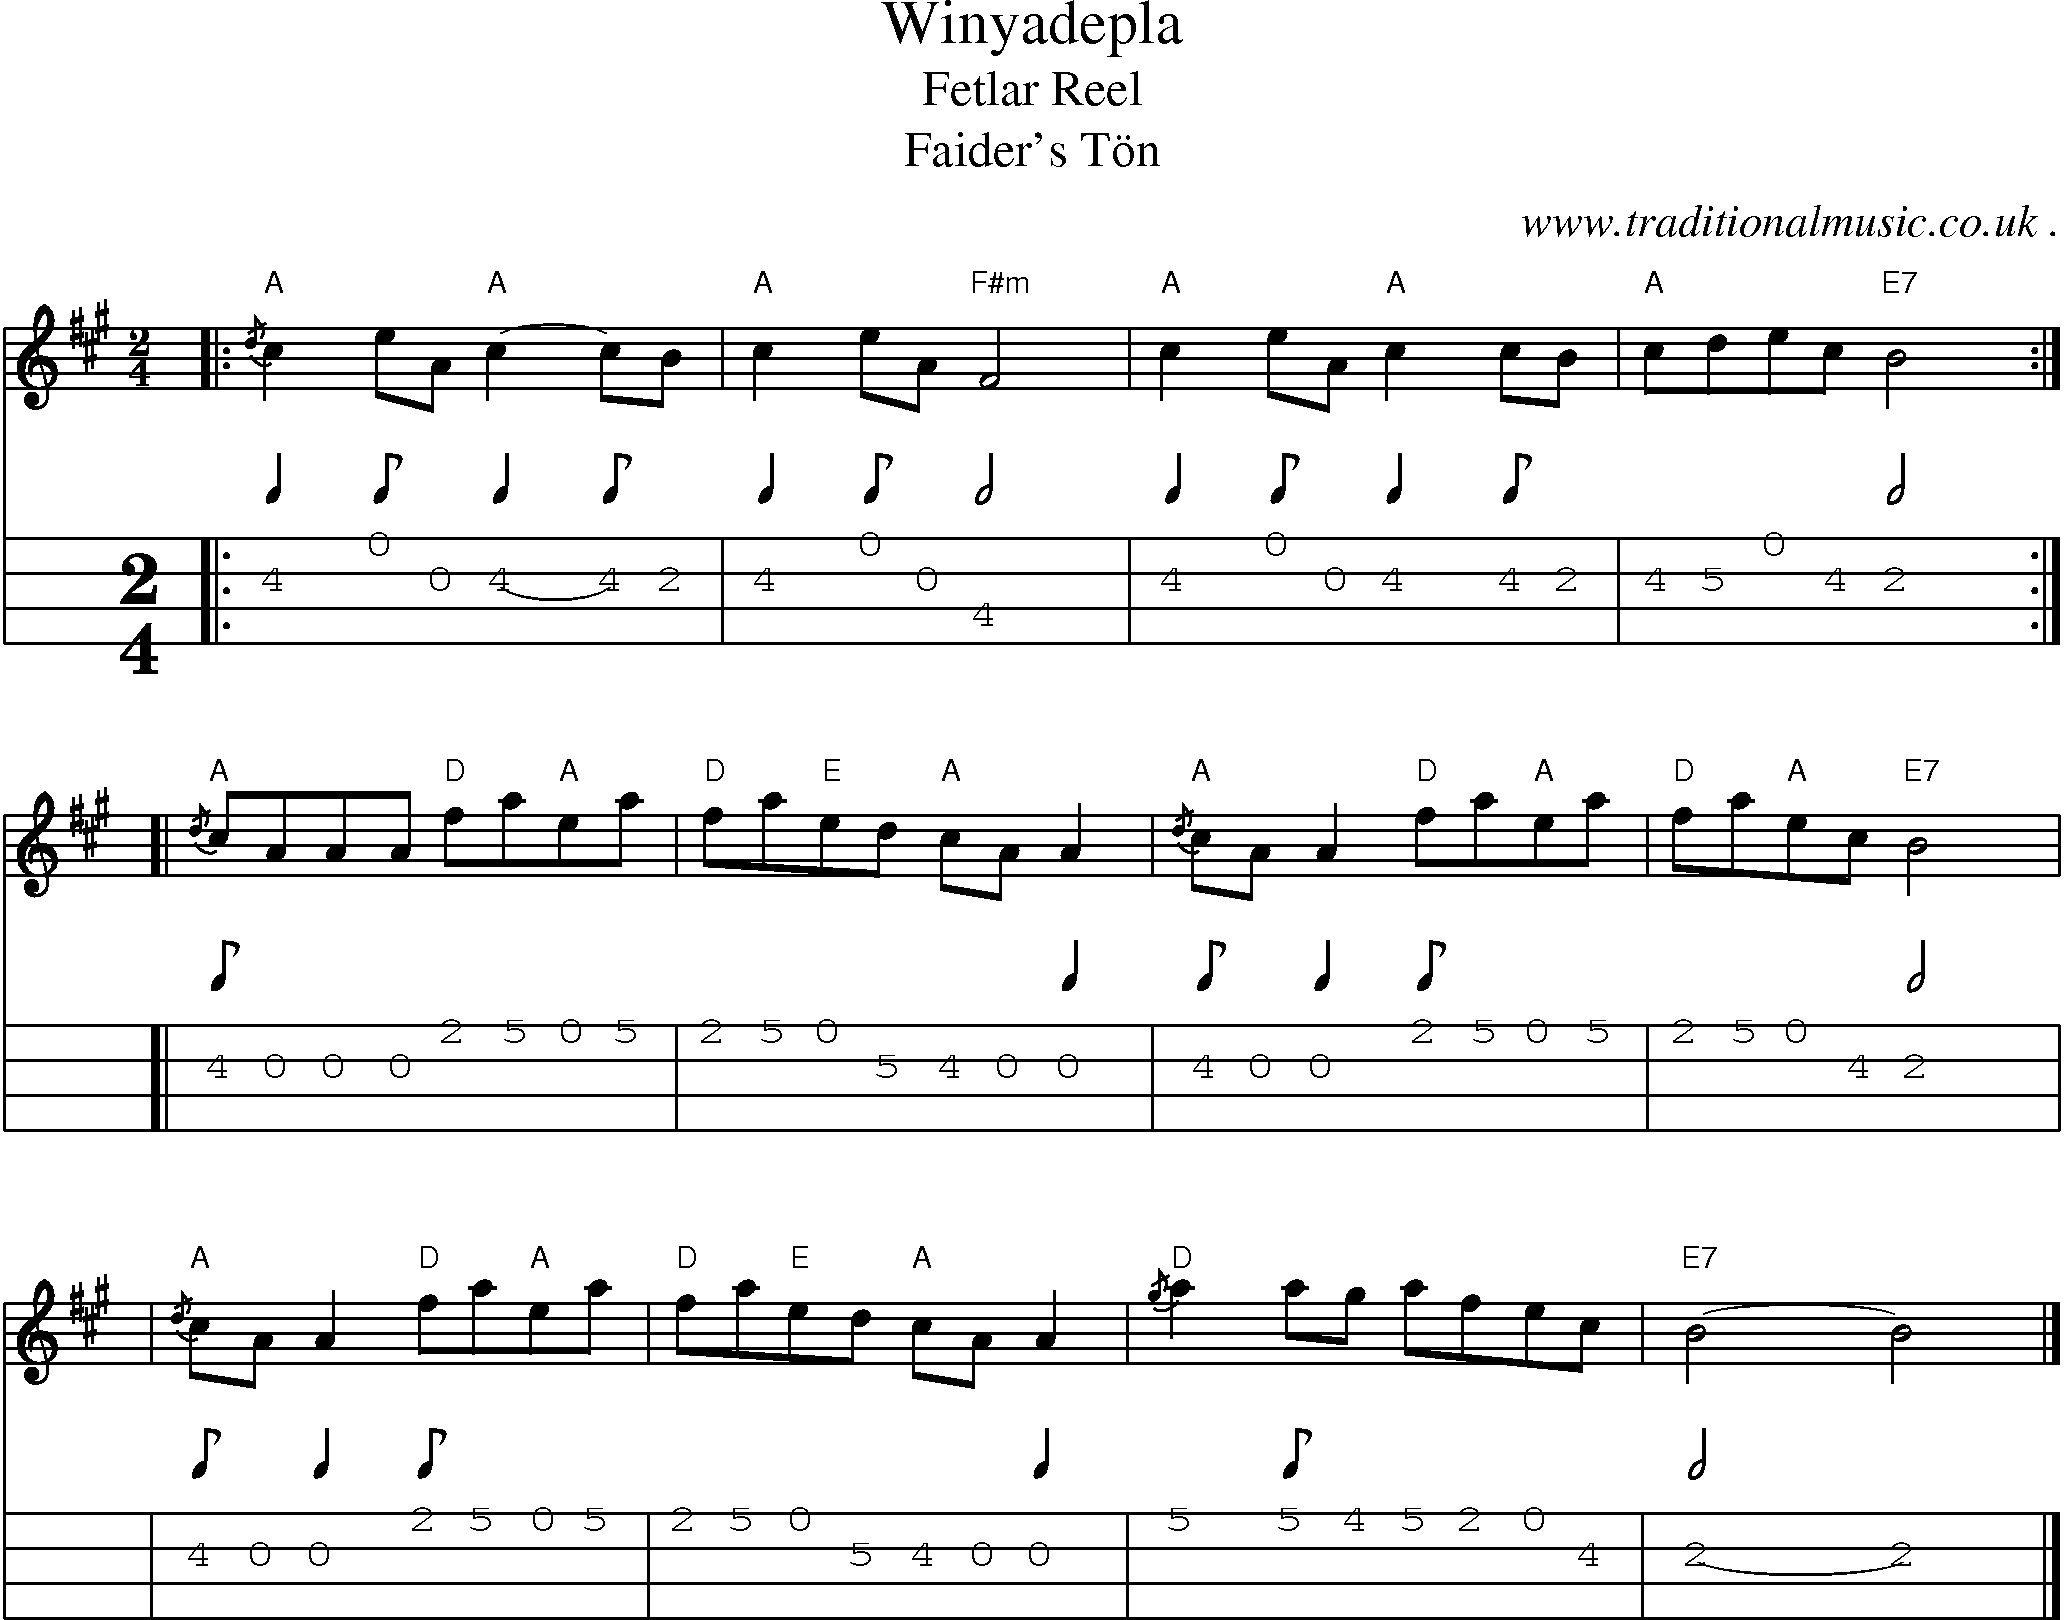 Sheet-music  score, Chords and Mandolin Tabs for Winyadepla